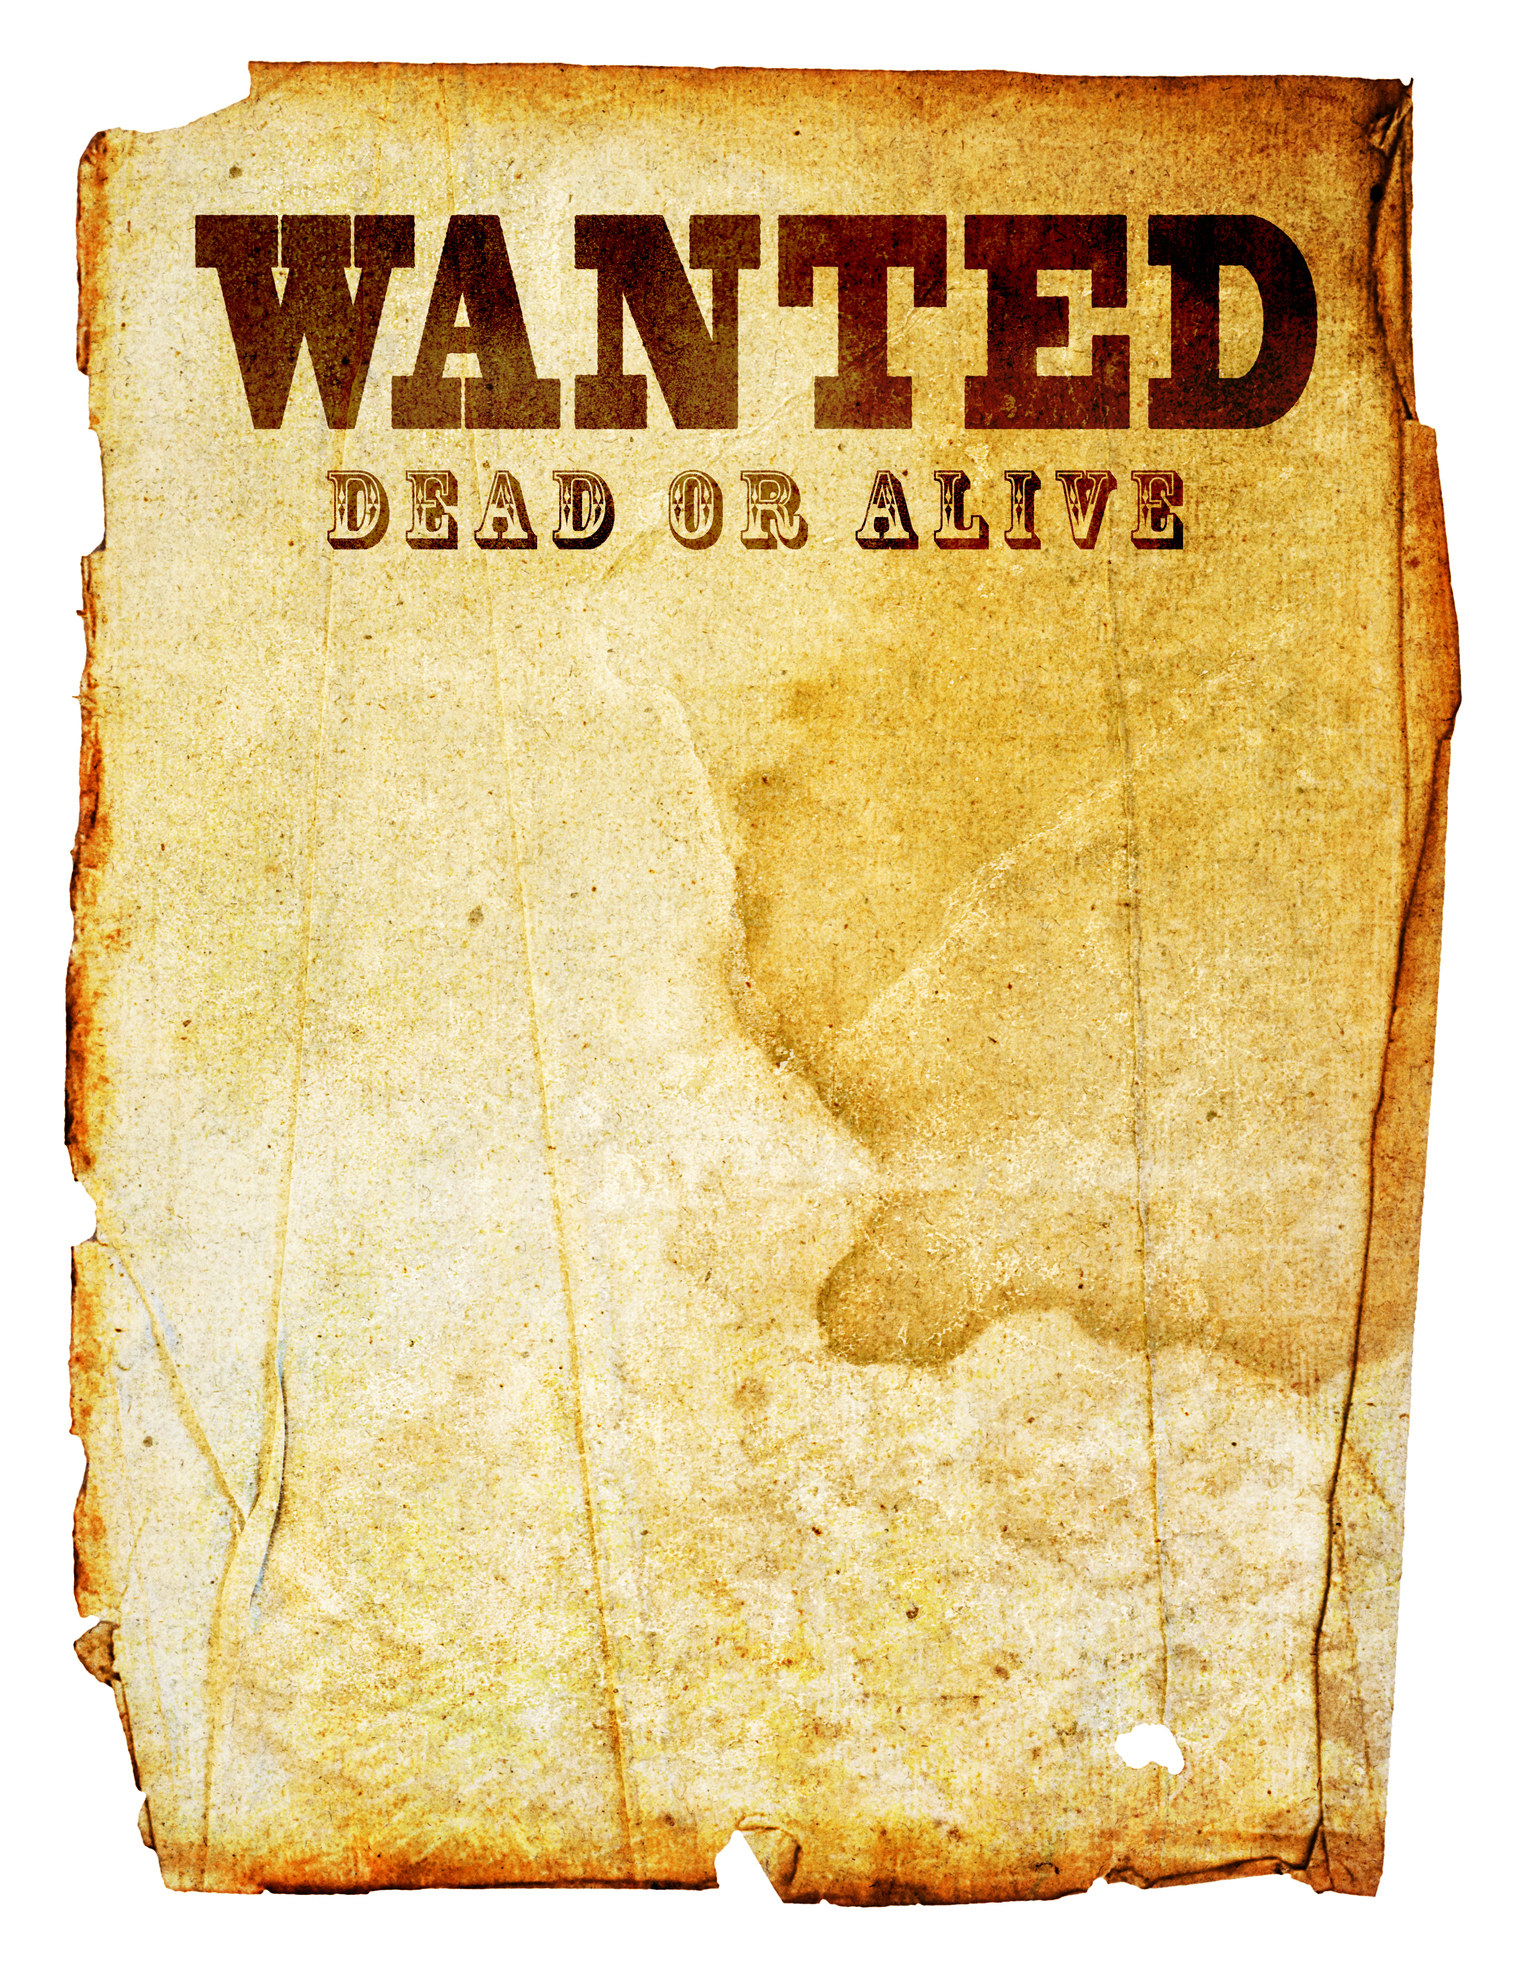 A wanted poster